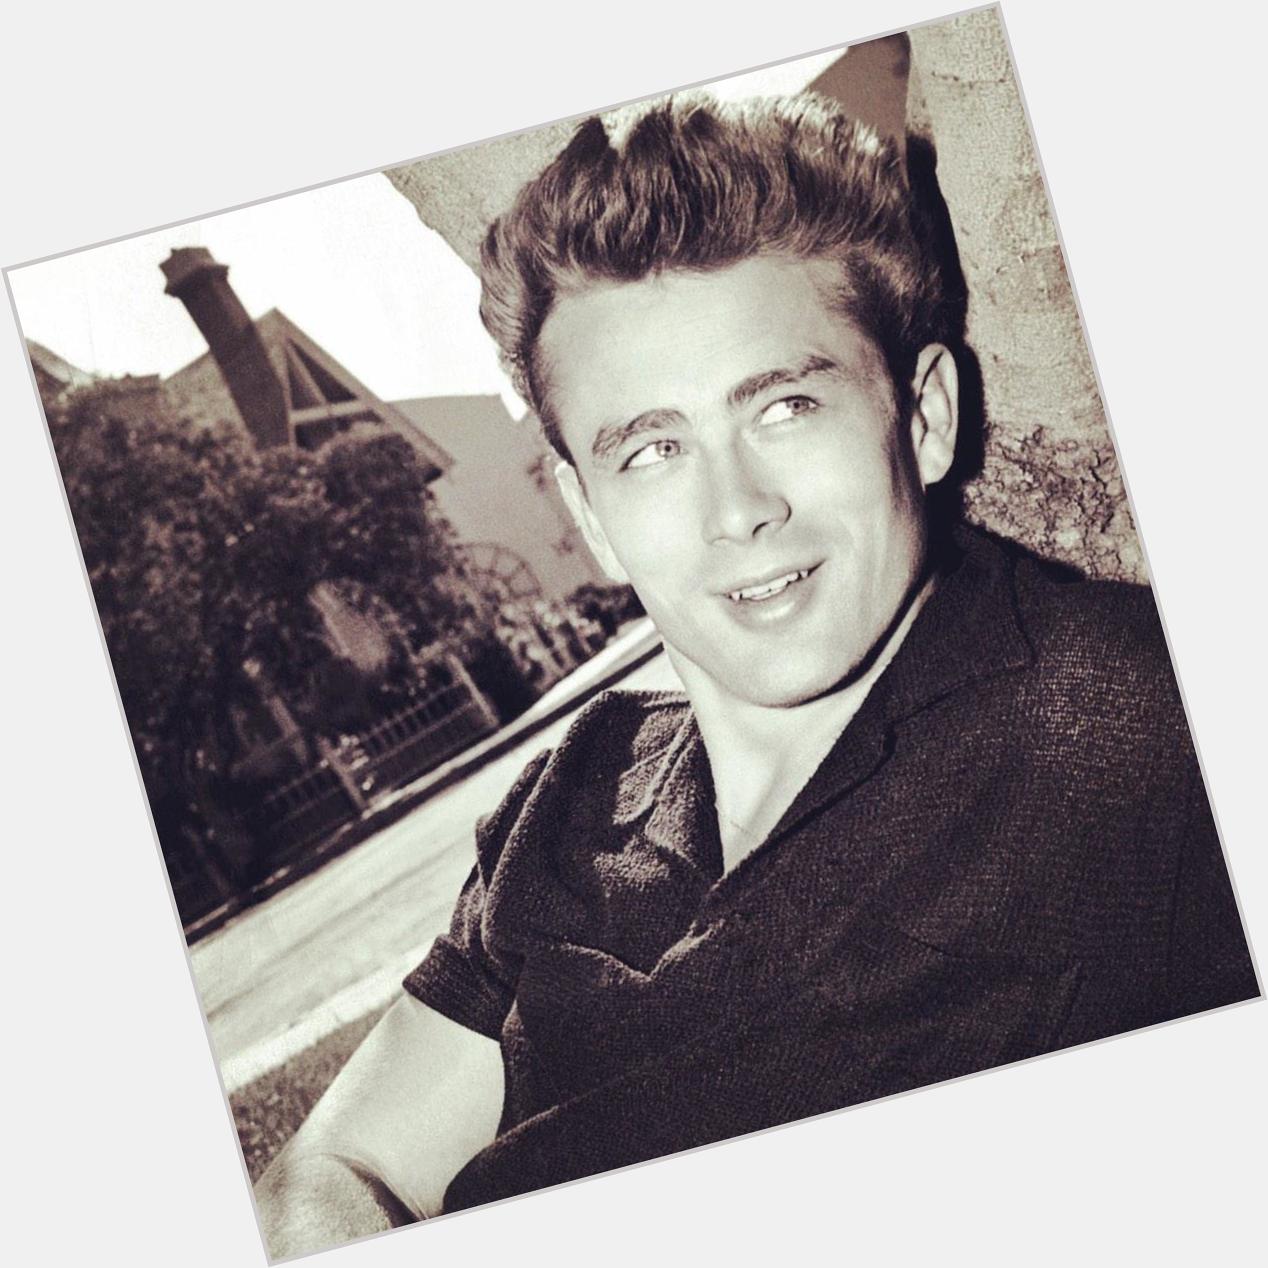 Happy birthday to the most beautiful man in the 1950s JAMES DEAN! 84 today he would have been R.I.P ! 